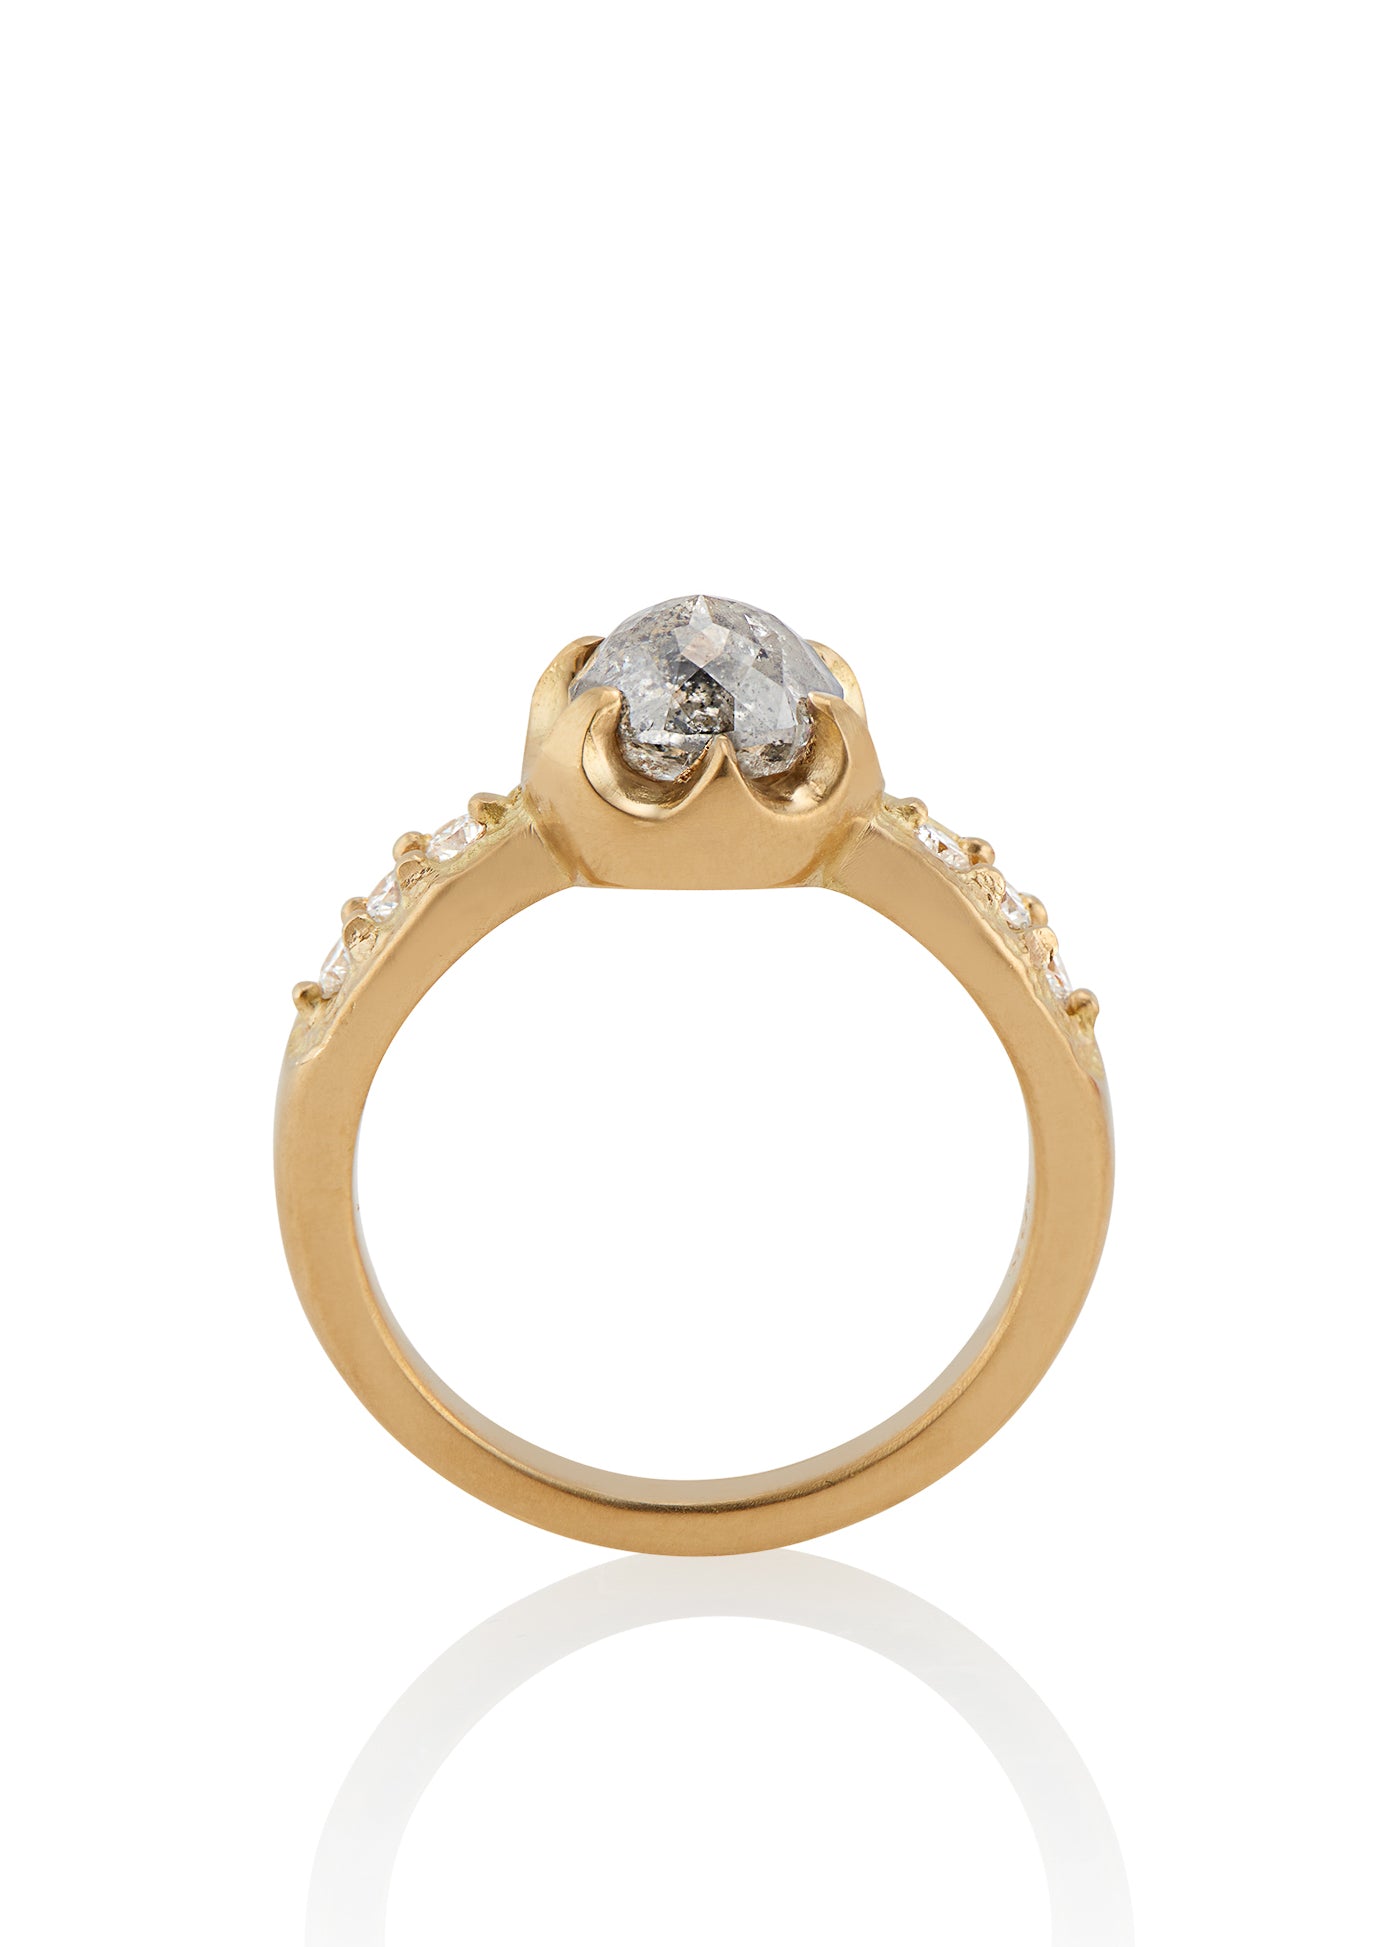 Inspired by the mesmerizing solo by musician Maxence Cyrin, the Gradiva ring embodies both the resonant chords and whimsical trills of the piano in a piece that marries substance with ethereal beauty. Brilliant inlaid diamonds adorn the band of the ring as a precious rose cut diamond sits prominently within the gold prongs—an heirloom-worthy ring to be cherished for generations.